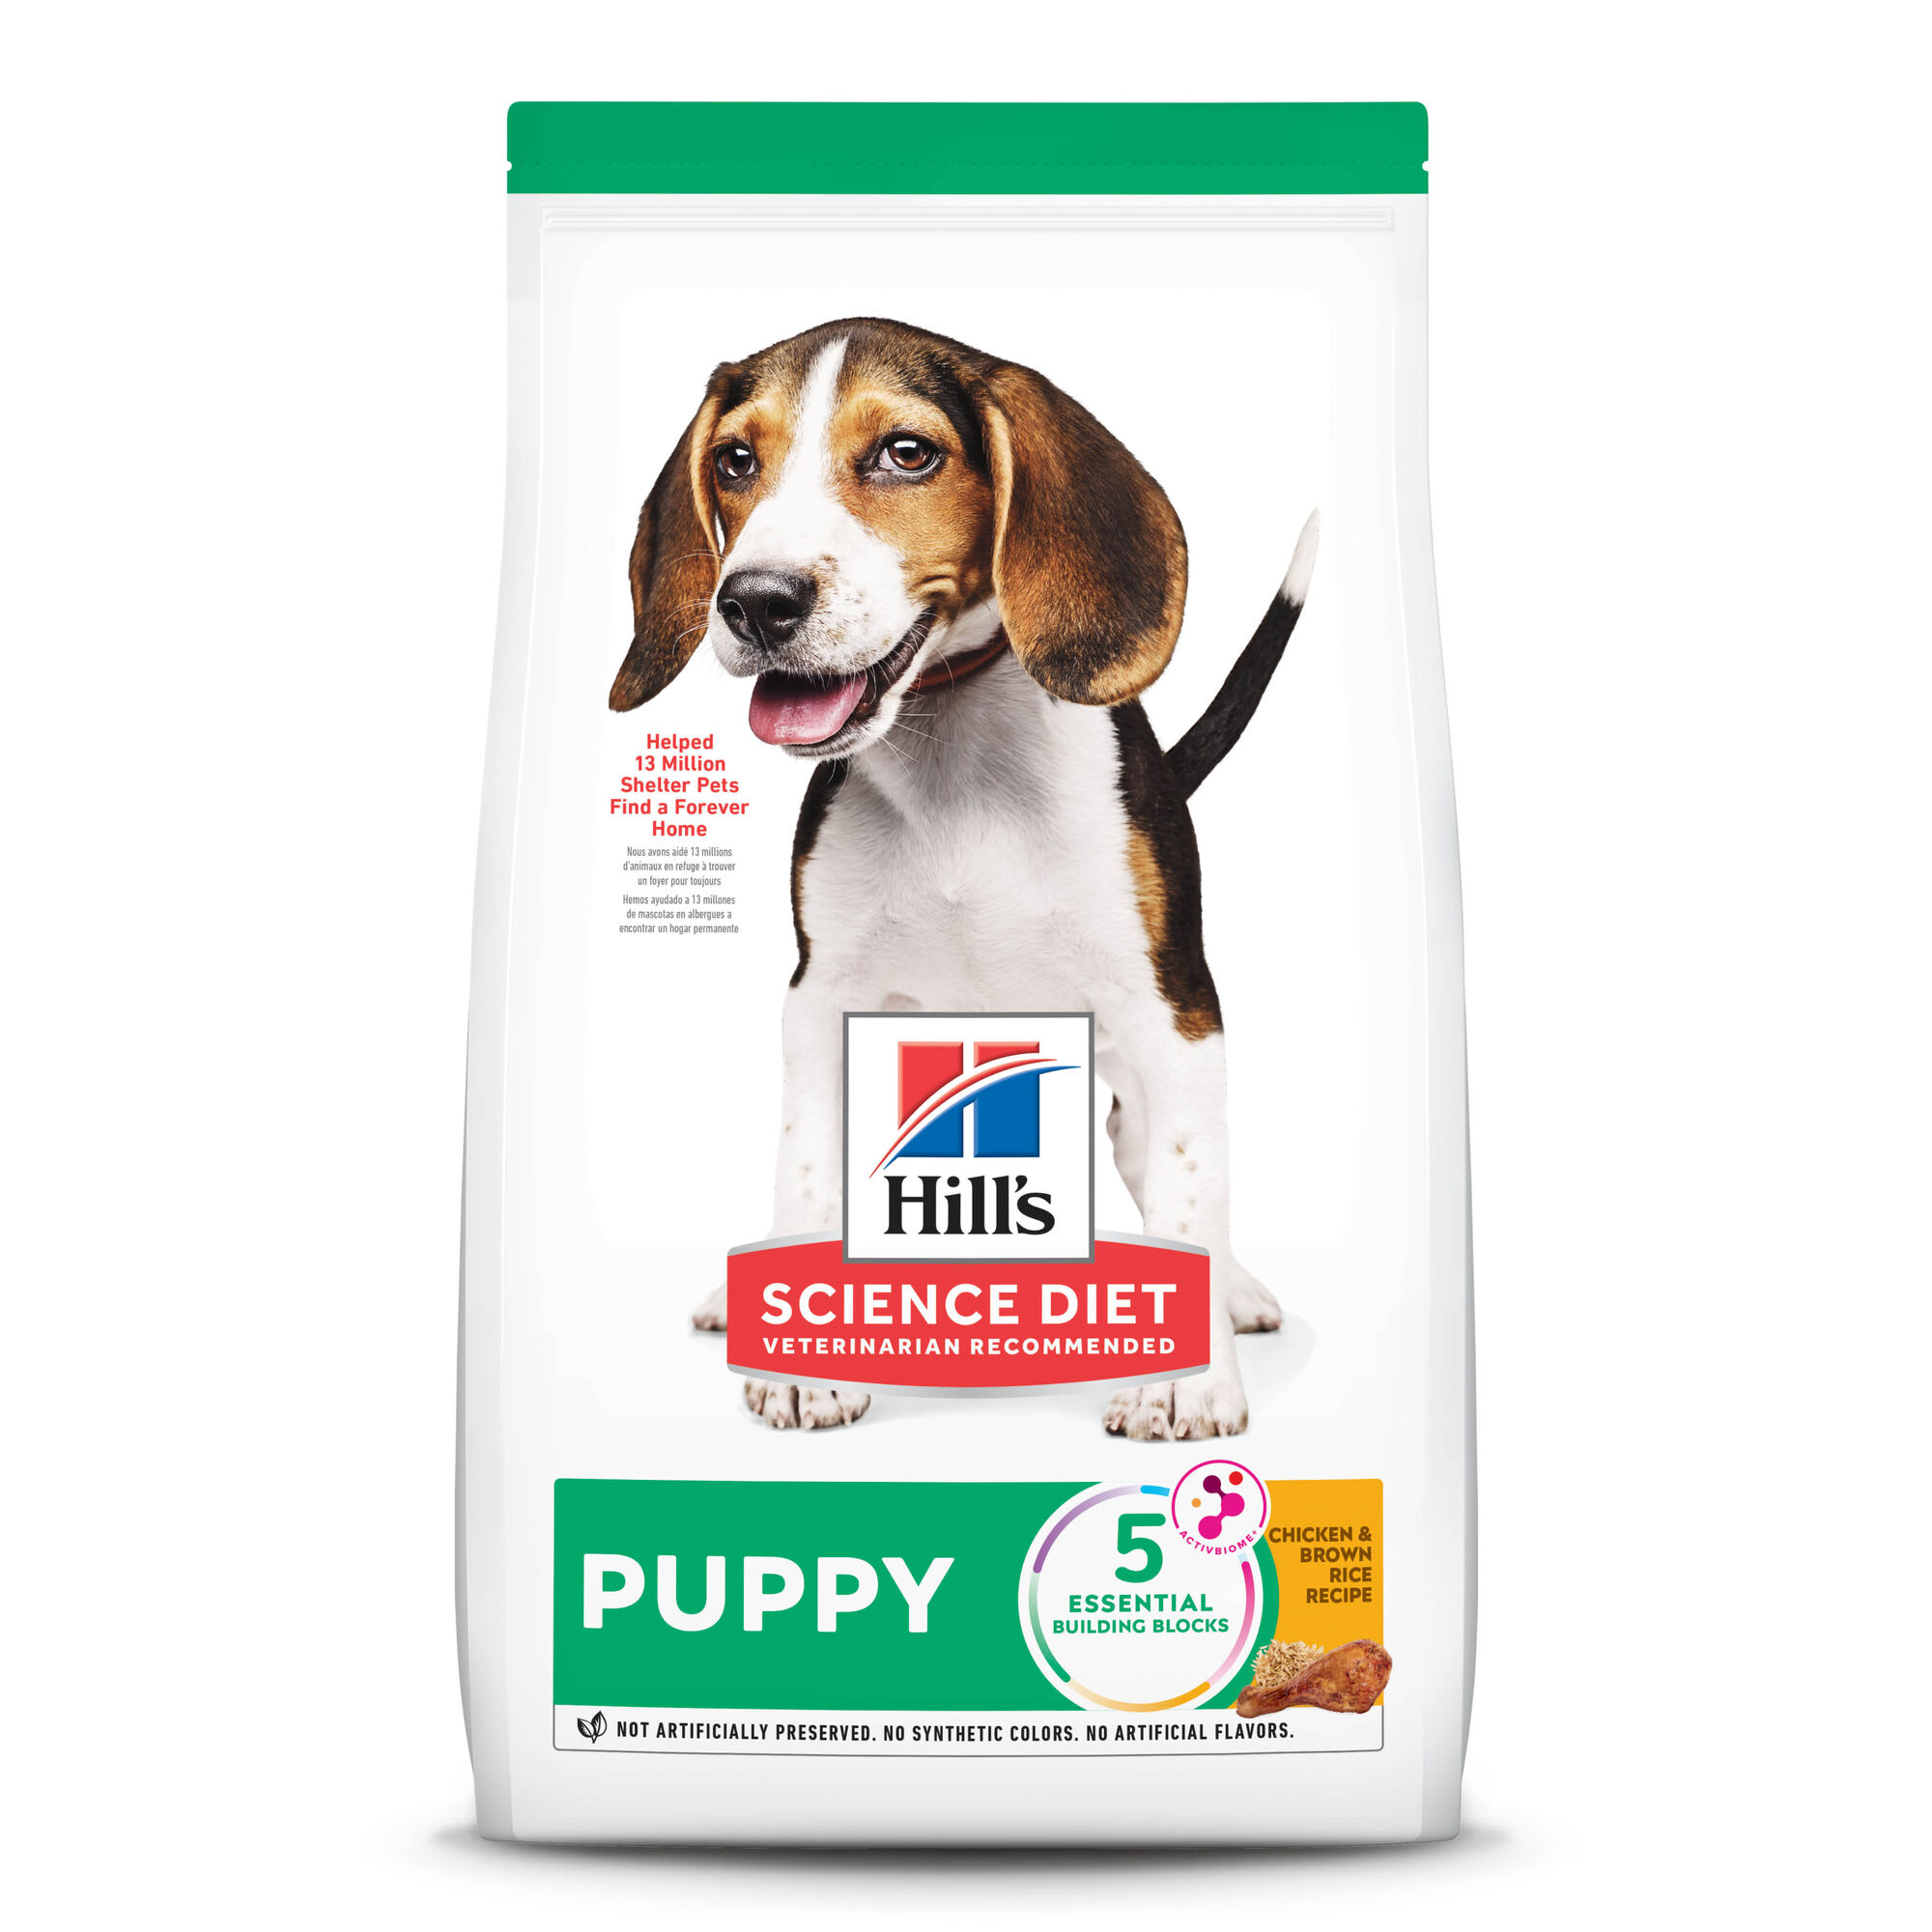 Photos - Dog Food Hills Hill's Hill's Science Diet Chicken & Brown Rice Recipe Dry Puppy Food, 4.5 